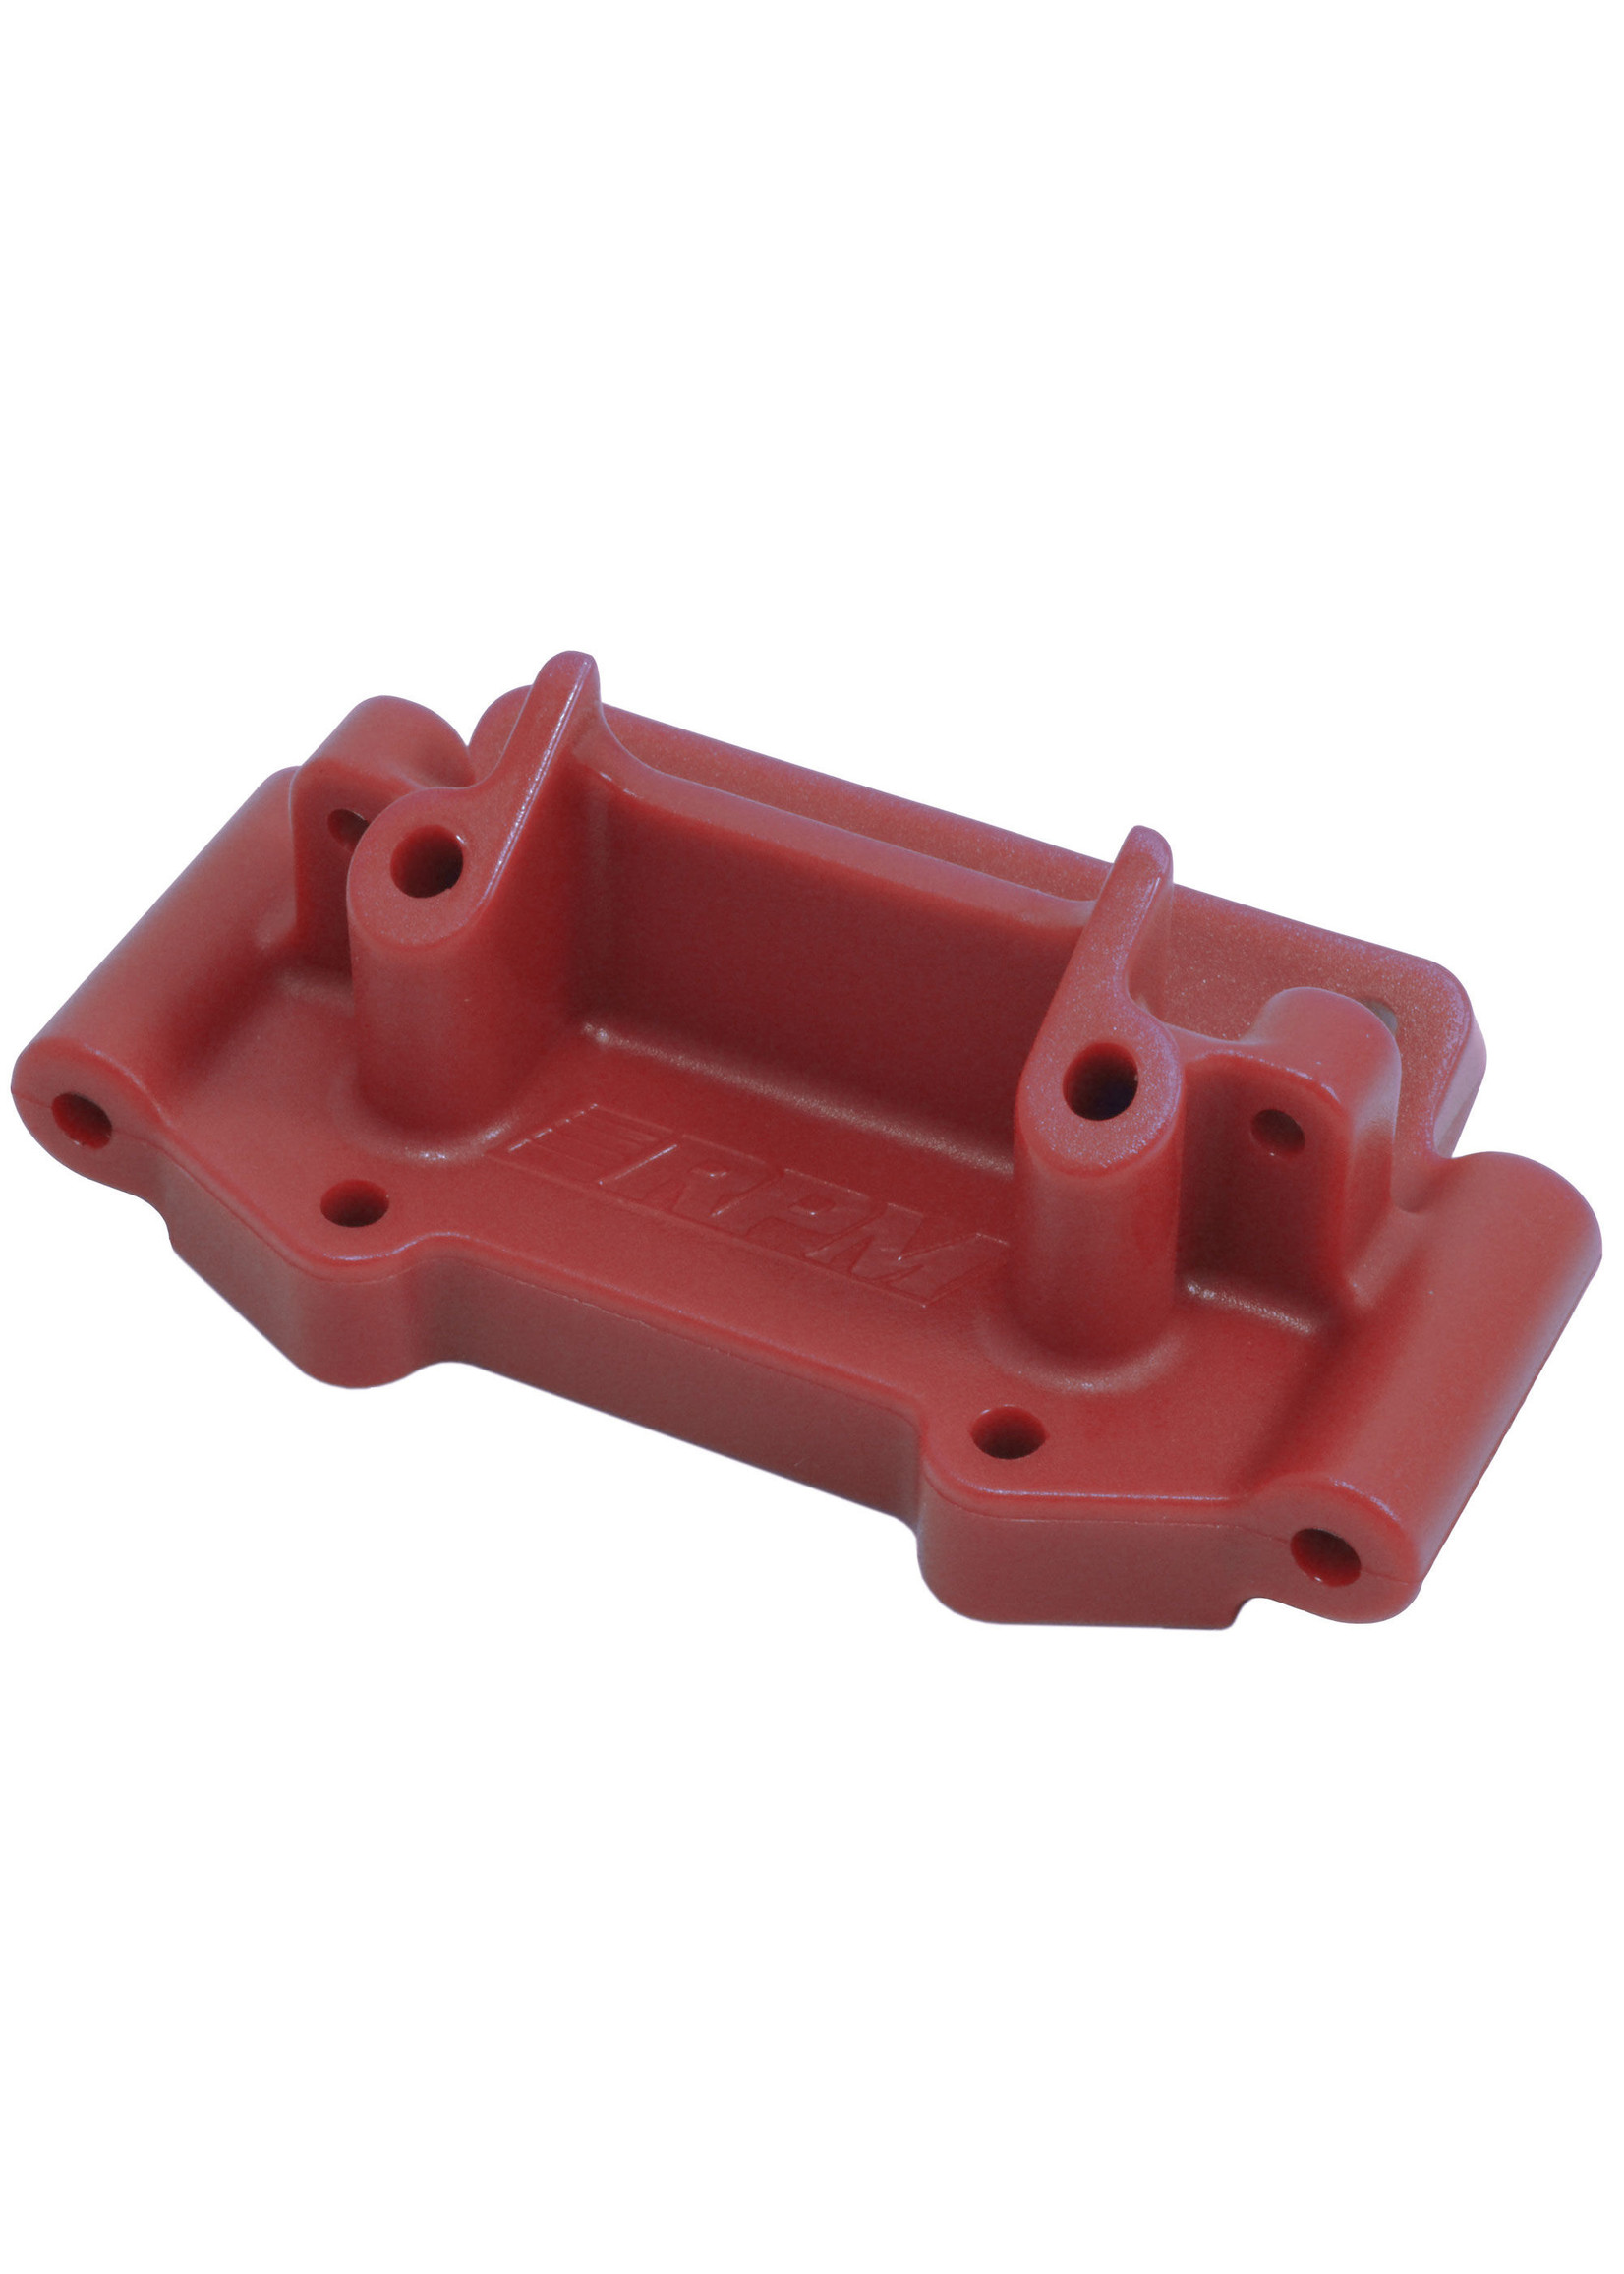 RPM RPM73759 RPM Red Front Bulkhead for Traxxas 1/10 2WD Vehicles